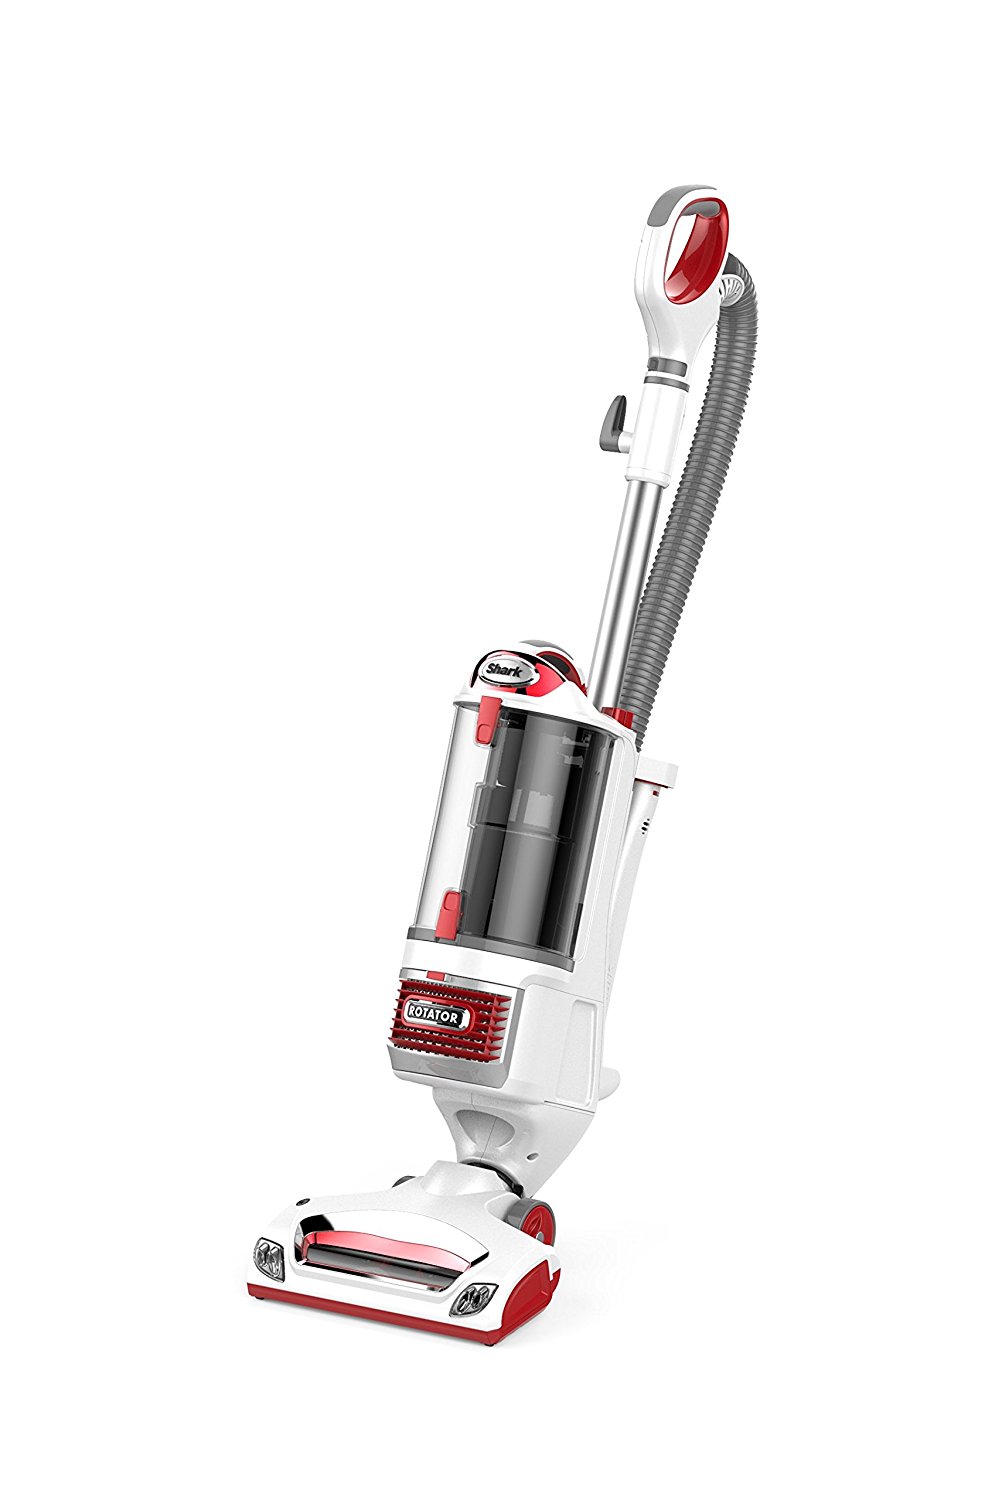 Today only: Shark NV500 Rotator Professional Lift-Away bagless upright vacuum for $150